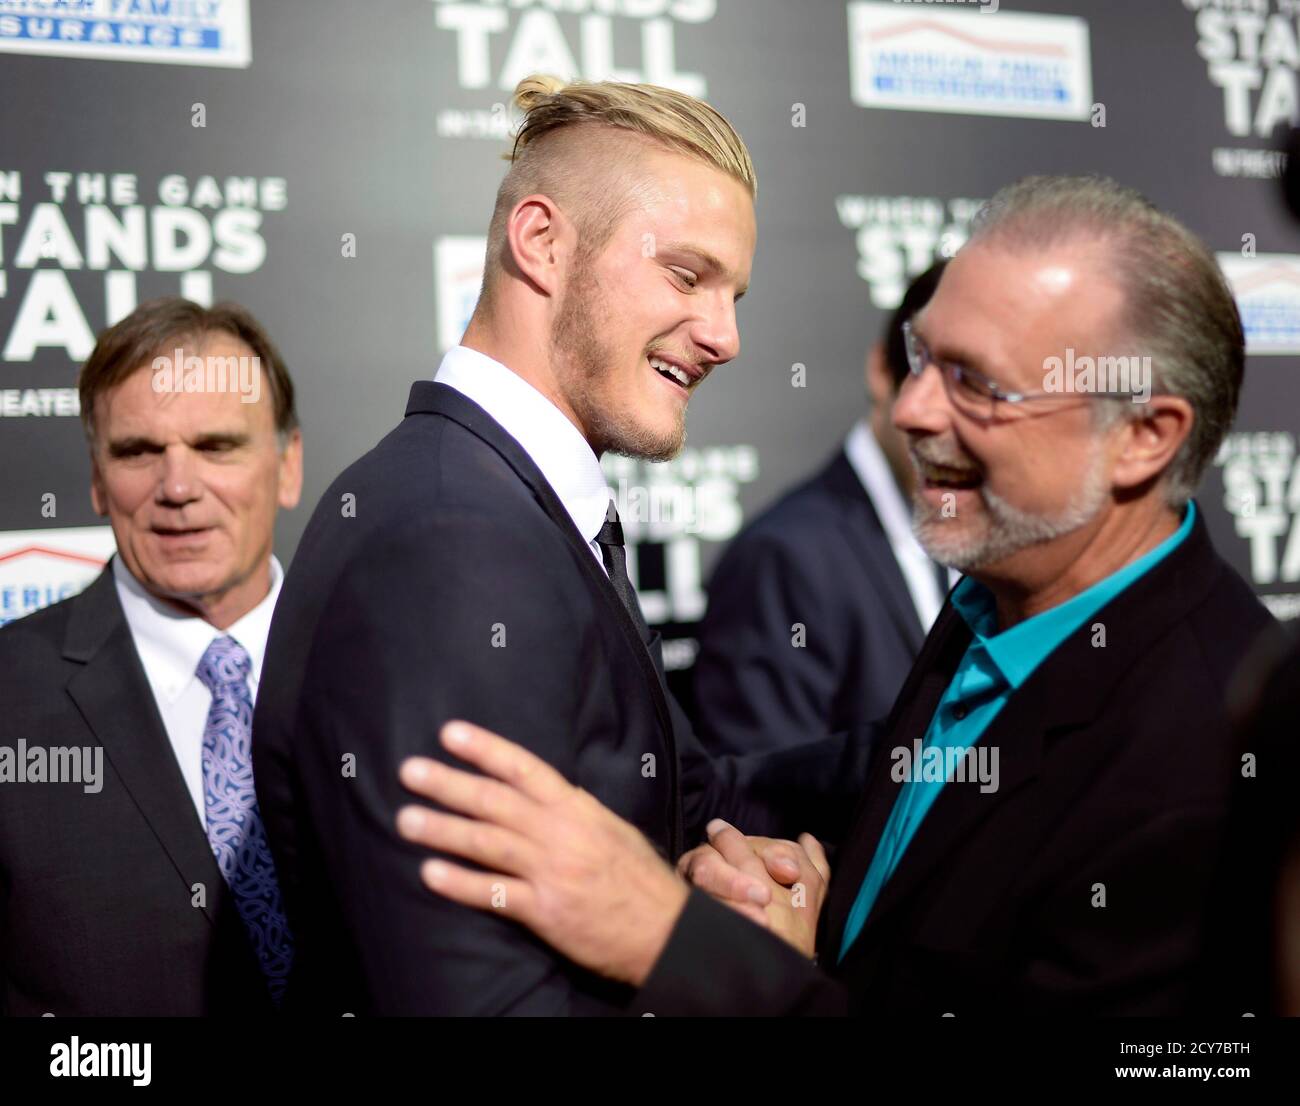 Cast member Alexander Ludwig (C) greets assistant football coach Terry  Eidson (R) as former football coach Bob Ladouceur looks on during premiere  of the film 